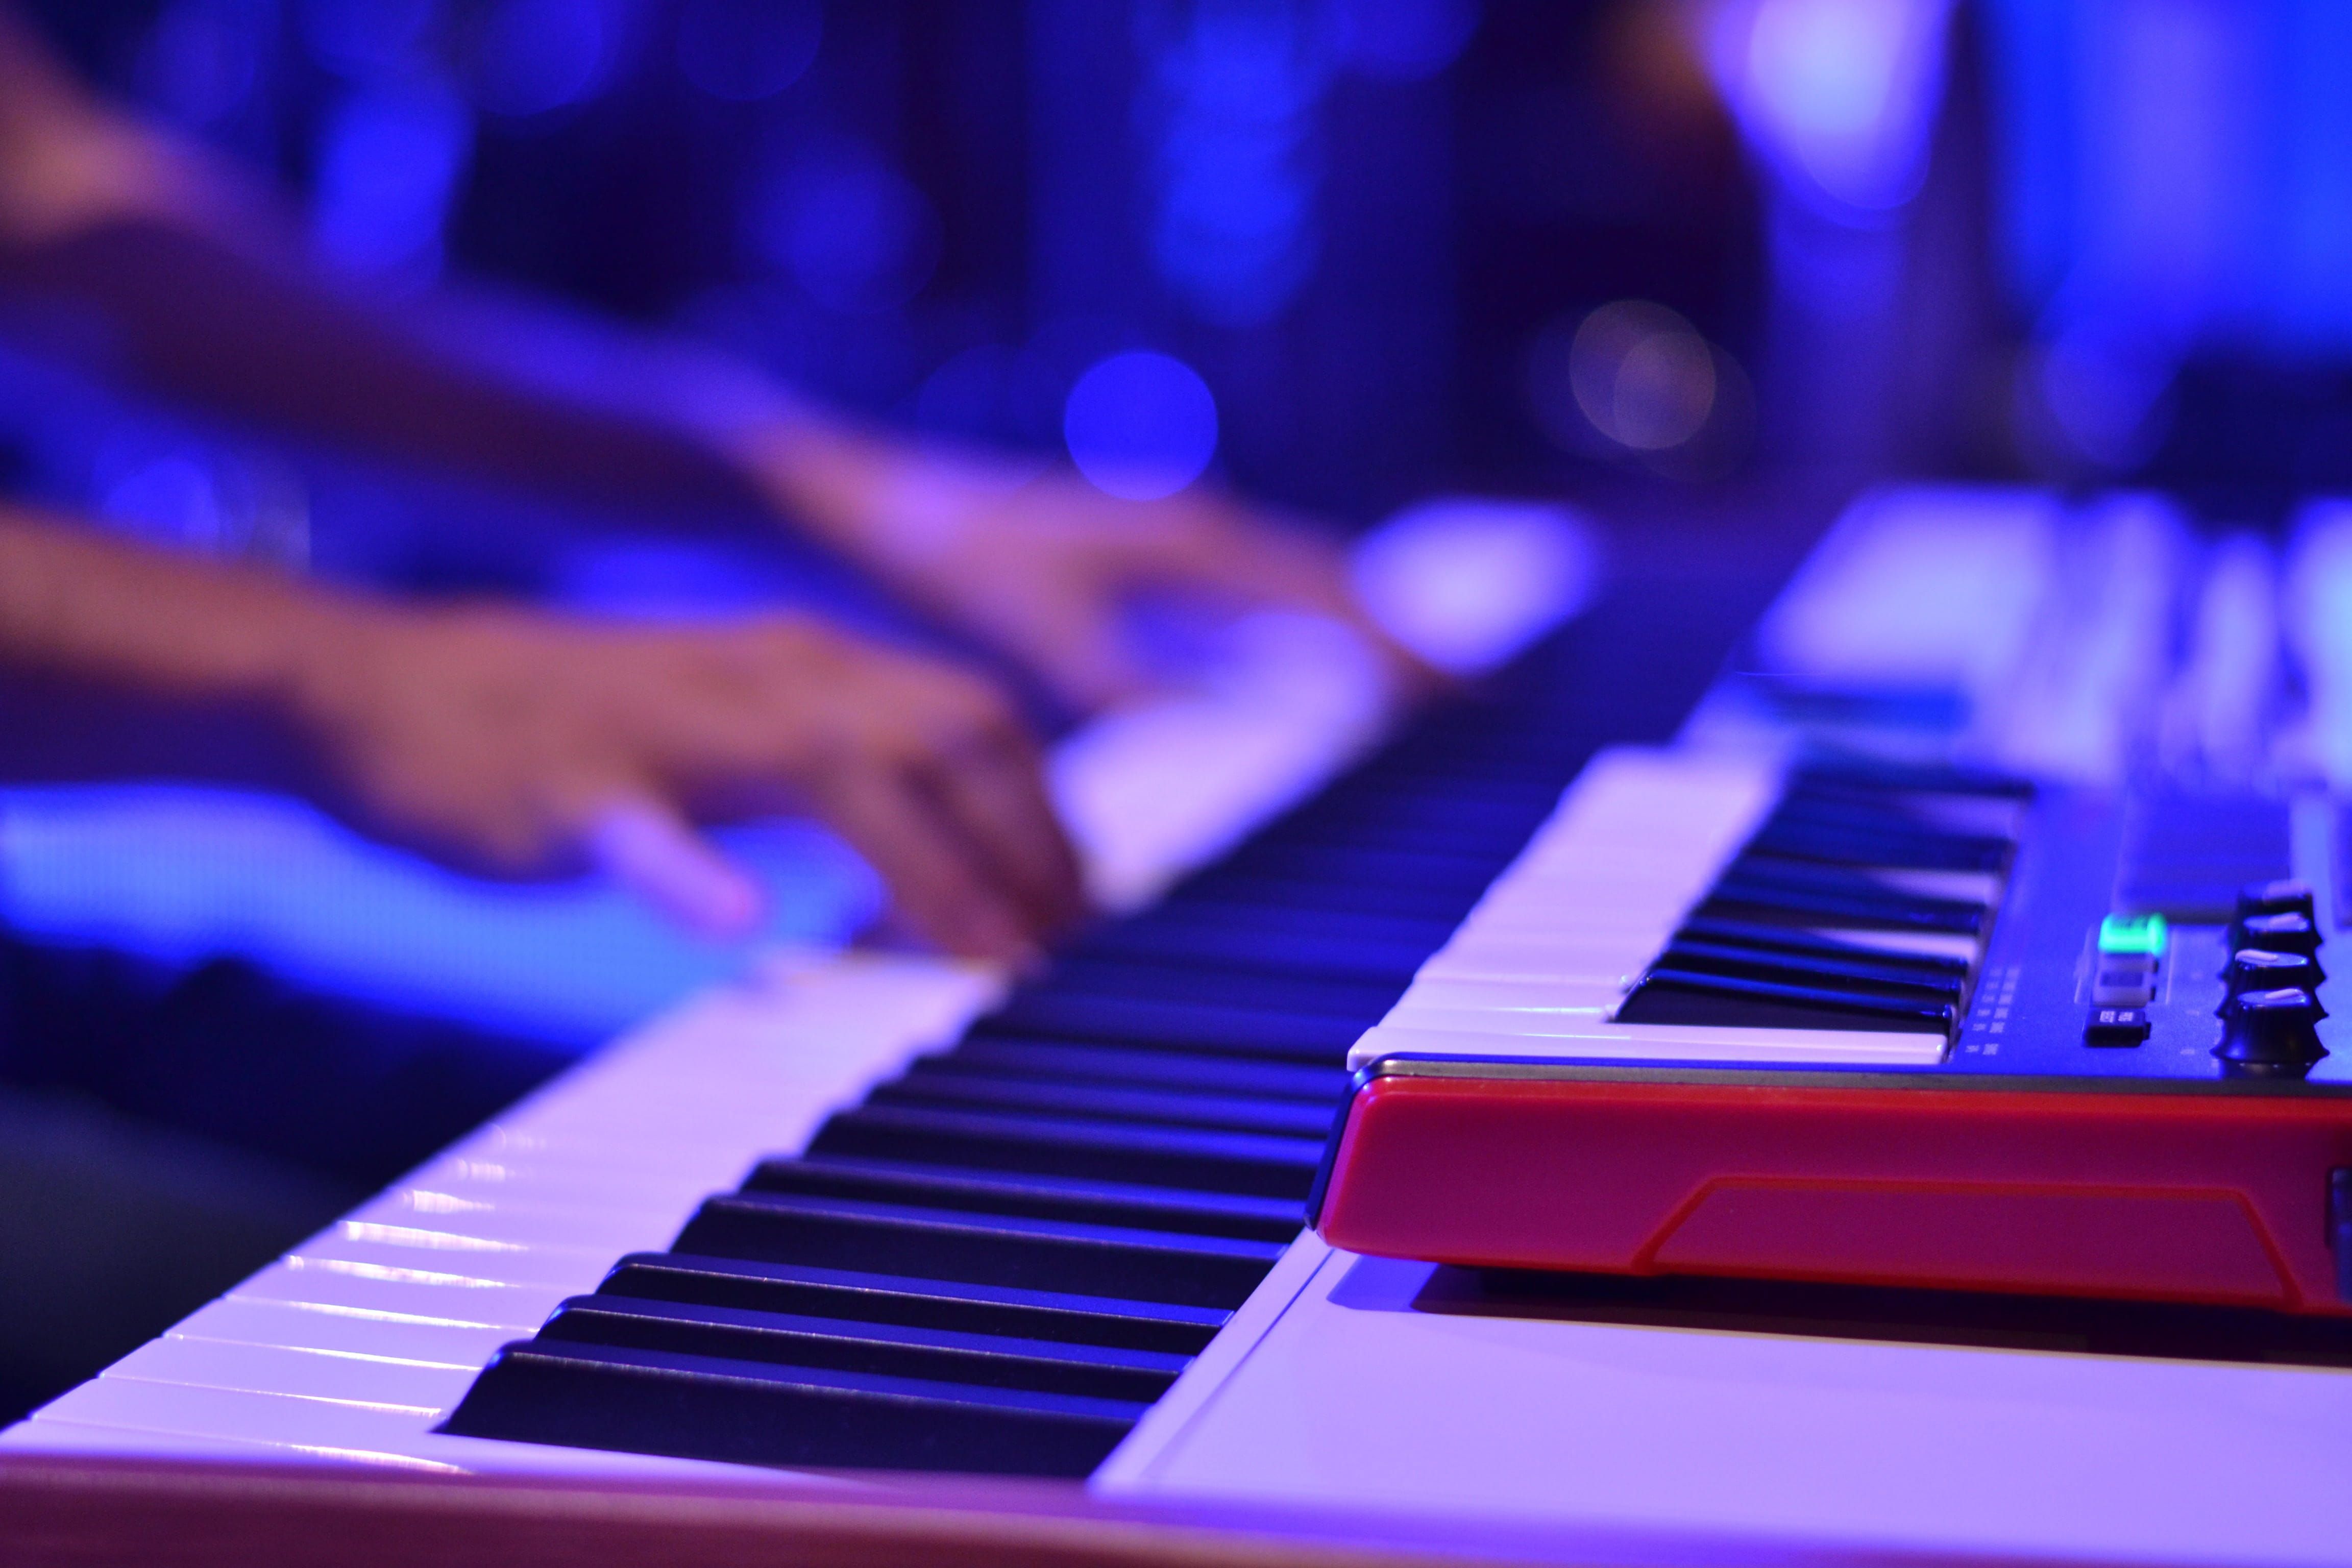 Person playing the keyboard at a music event #Person #keyboard #music #event #people #piano #sound #musician piano Key musical. Keyboard piano, Music event, Piano